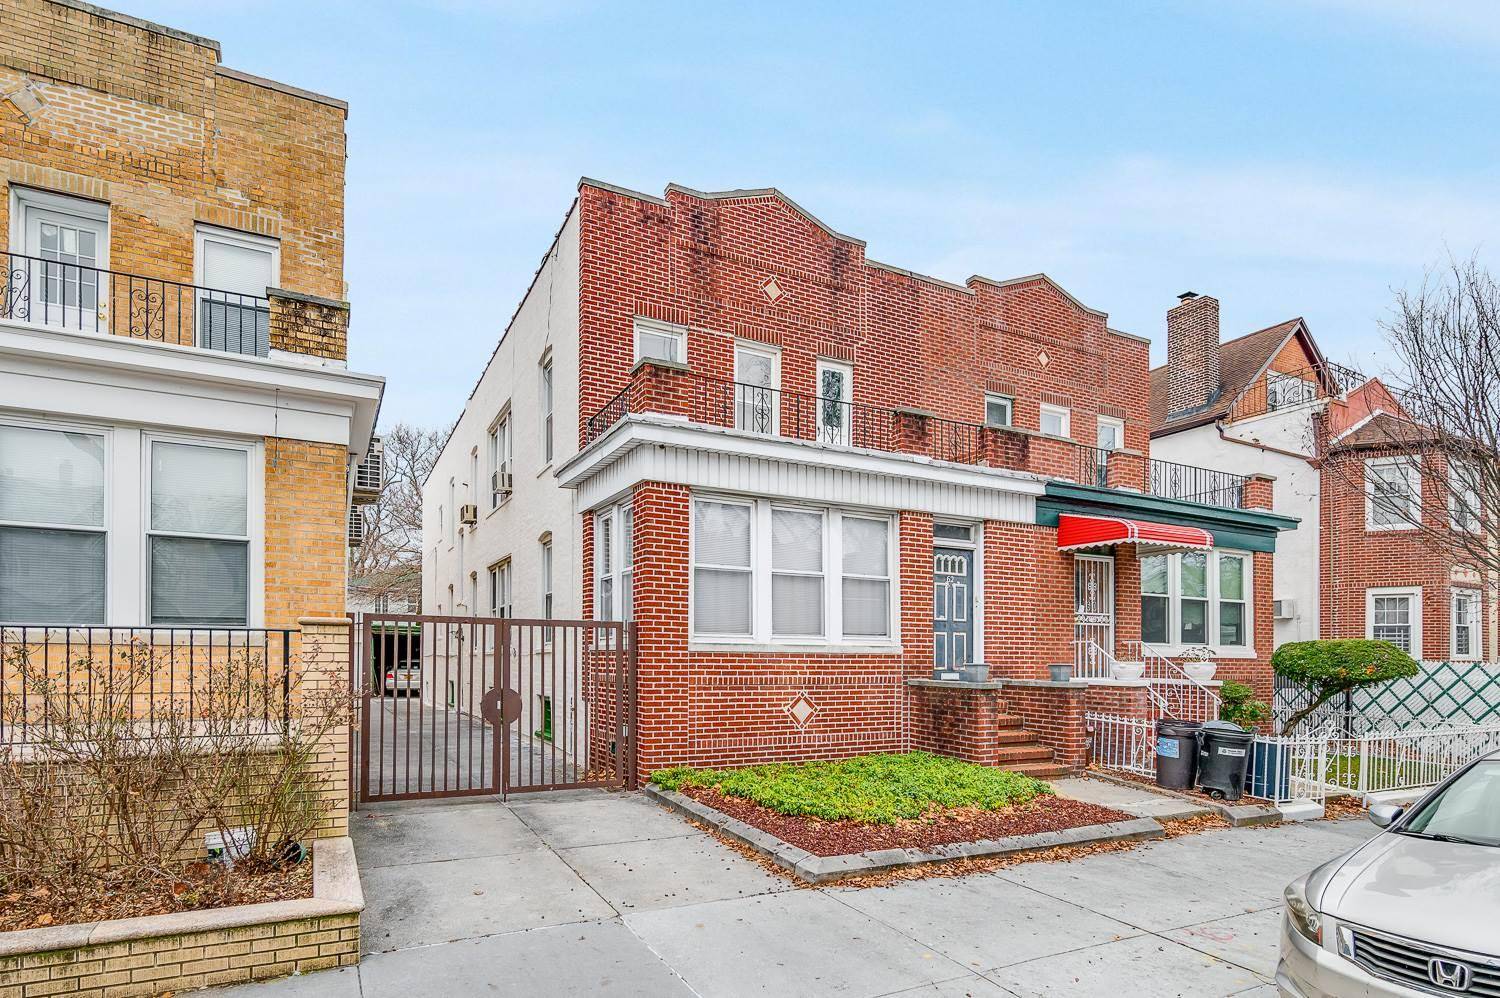 Great opportunity to own a two family property located in Bay Ridge, Brooklyn.